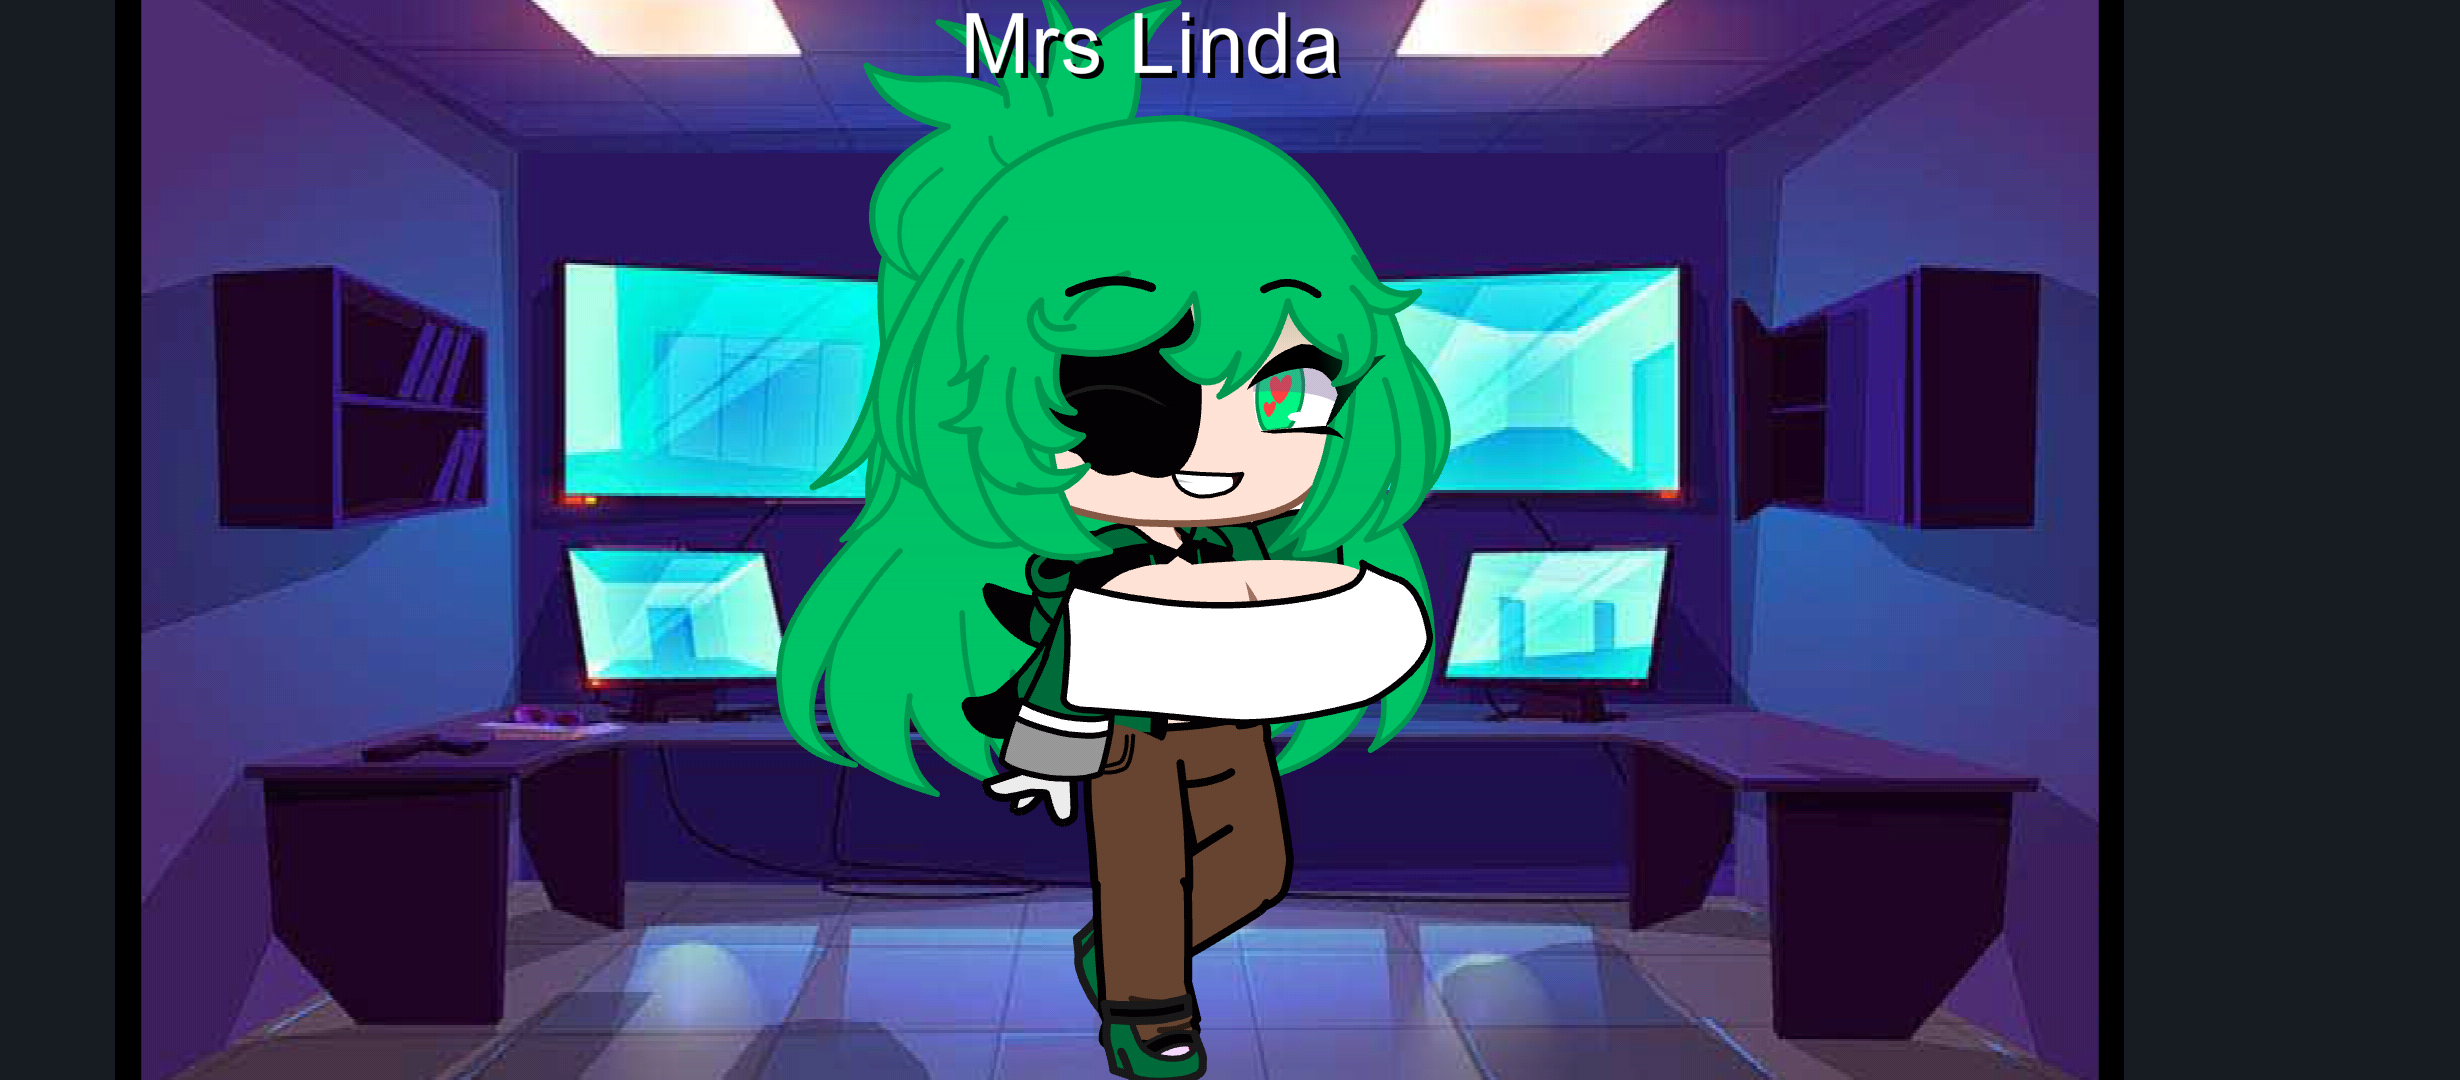 Mrs Linda the green imposter and her parasite monster form